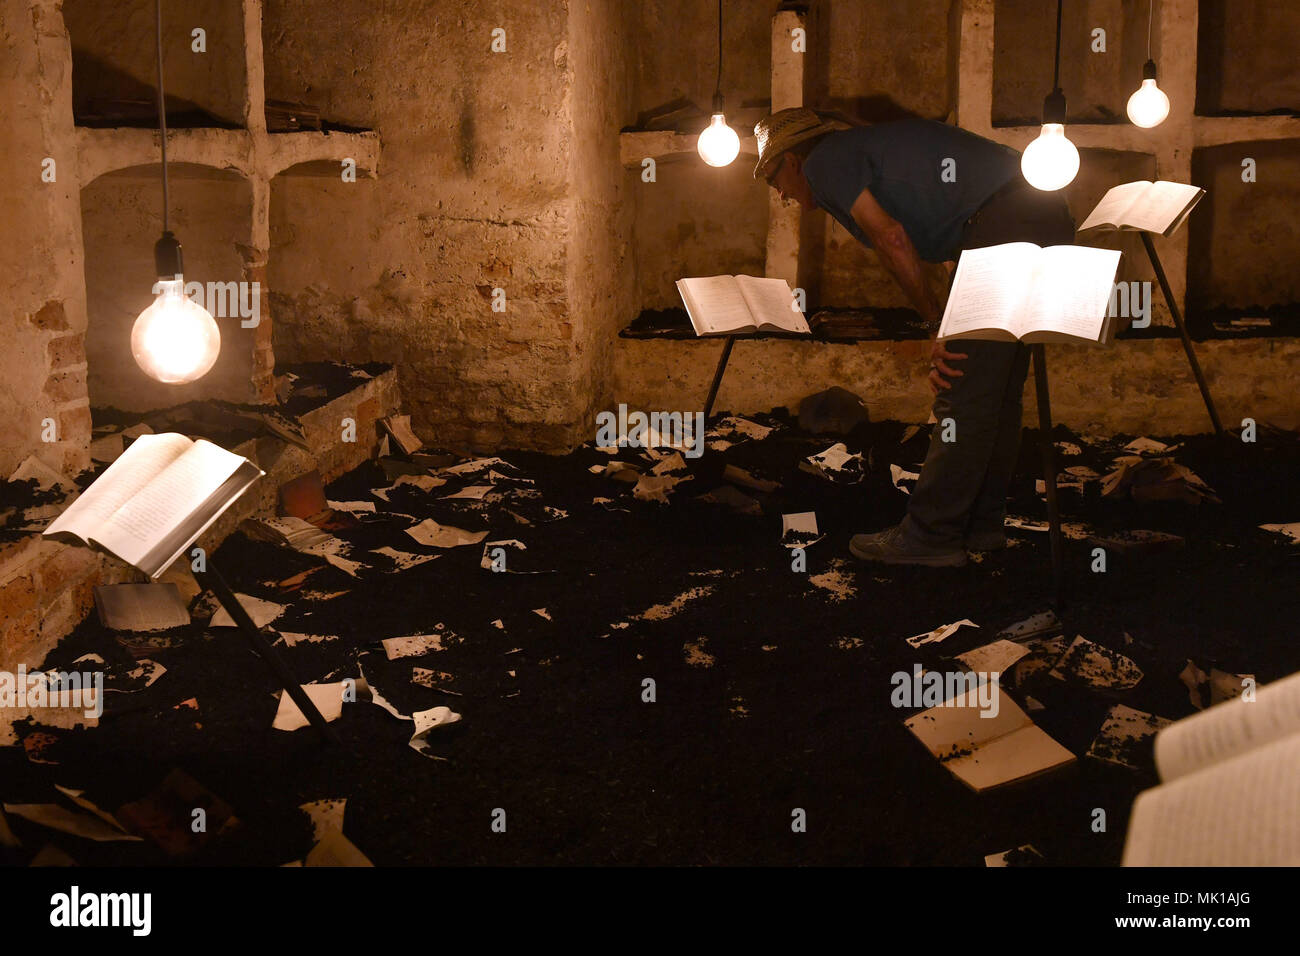 A visitor views books in the cellar of Blickling Hall in Norfolk which has been recreated to depict a university library destroyed by militants in Mosul, Iraq as part of the new art installation 'The Word Defiant!' which reveals stories of books that have been banned, burned, redacted, drowned, neglected and superseded. Stock Photo